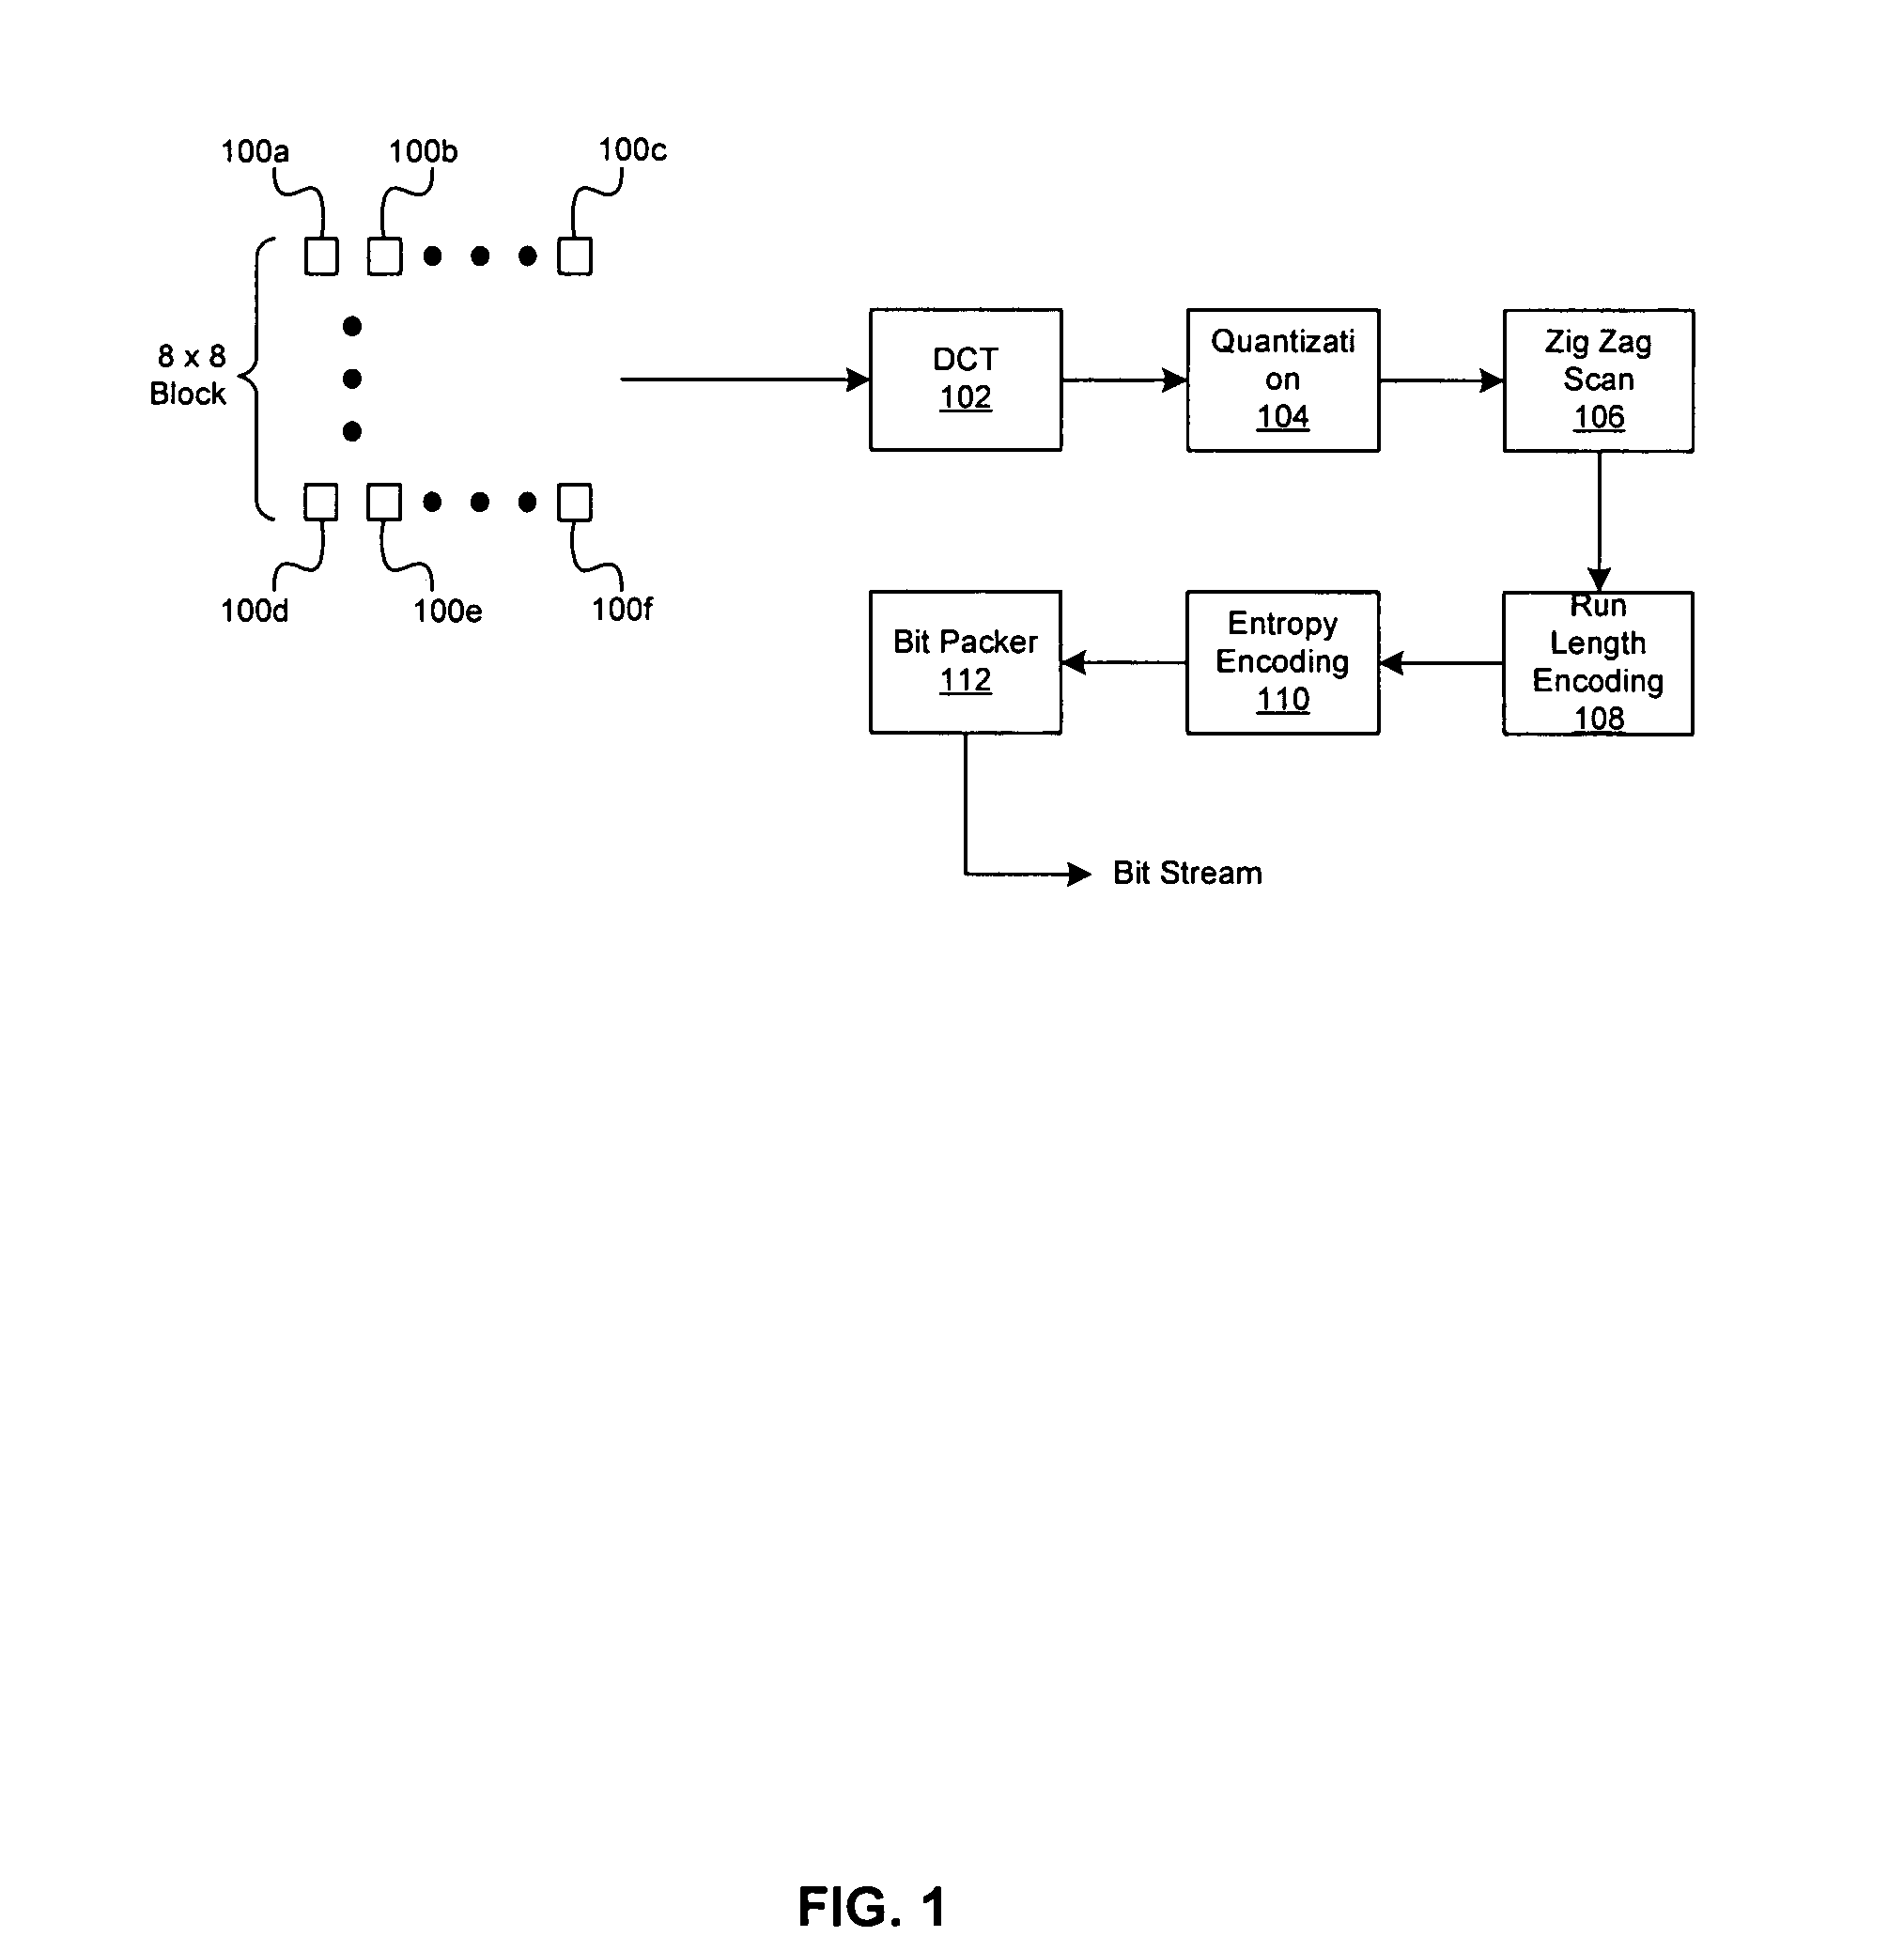 Method and system for improved lookup table (LUT) mechanism for Huffman decoding